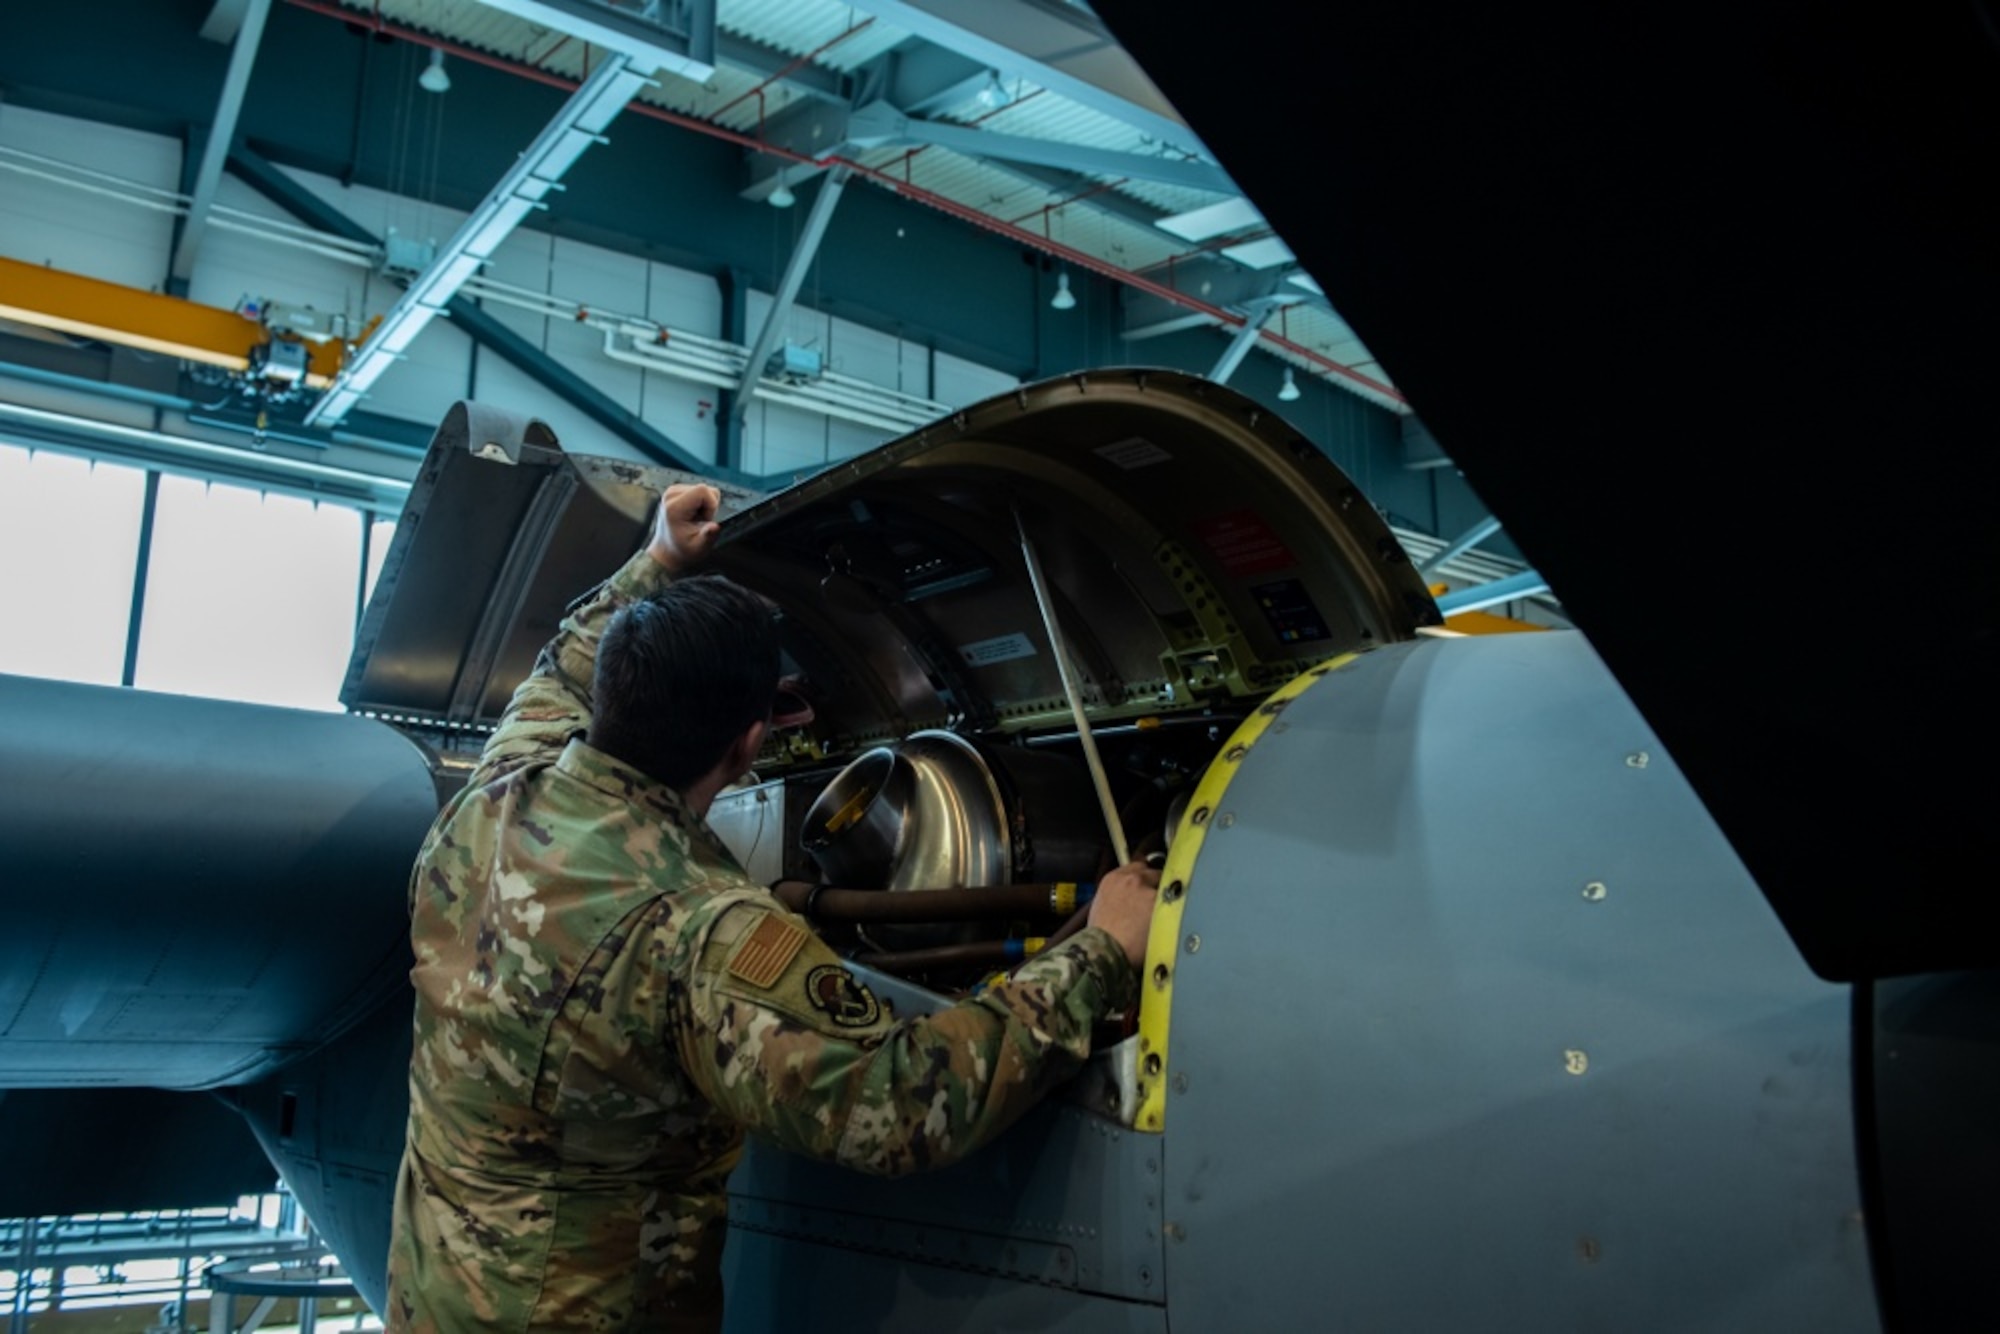 U.S. Air Force Airman 1st Class Ryan Hubbs, 86th Maintenance Squadron fuel cell technician, prepares to secure panels on a C-130J Super Hercules aircraft engine at Ramstein Air Base, Germany, Nov. 16, 2020. Repaneling is the process of securing panels which were previously removed for inspection and repair of an aircraft. (U.S. Air Force photo by Airman 1st Class Andrew J. Alvarado)